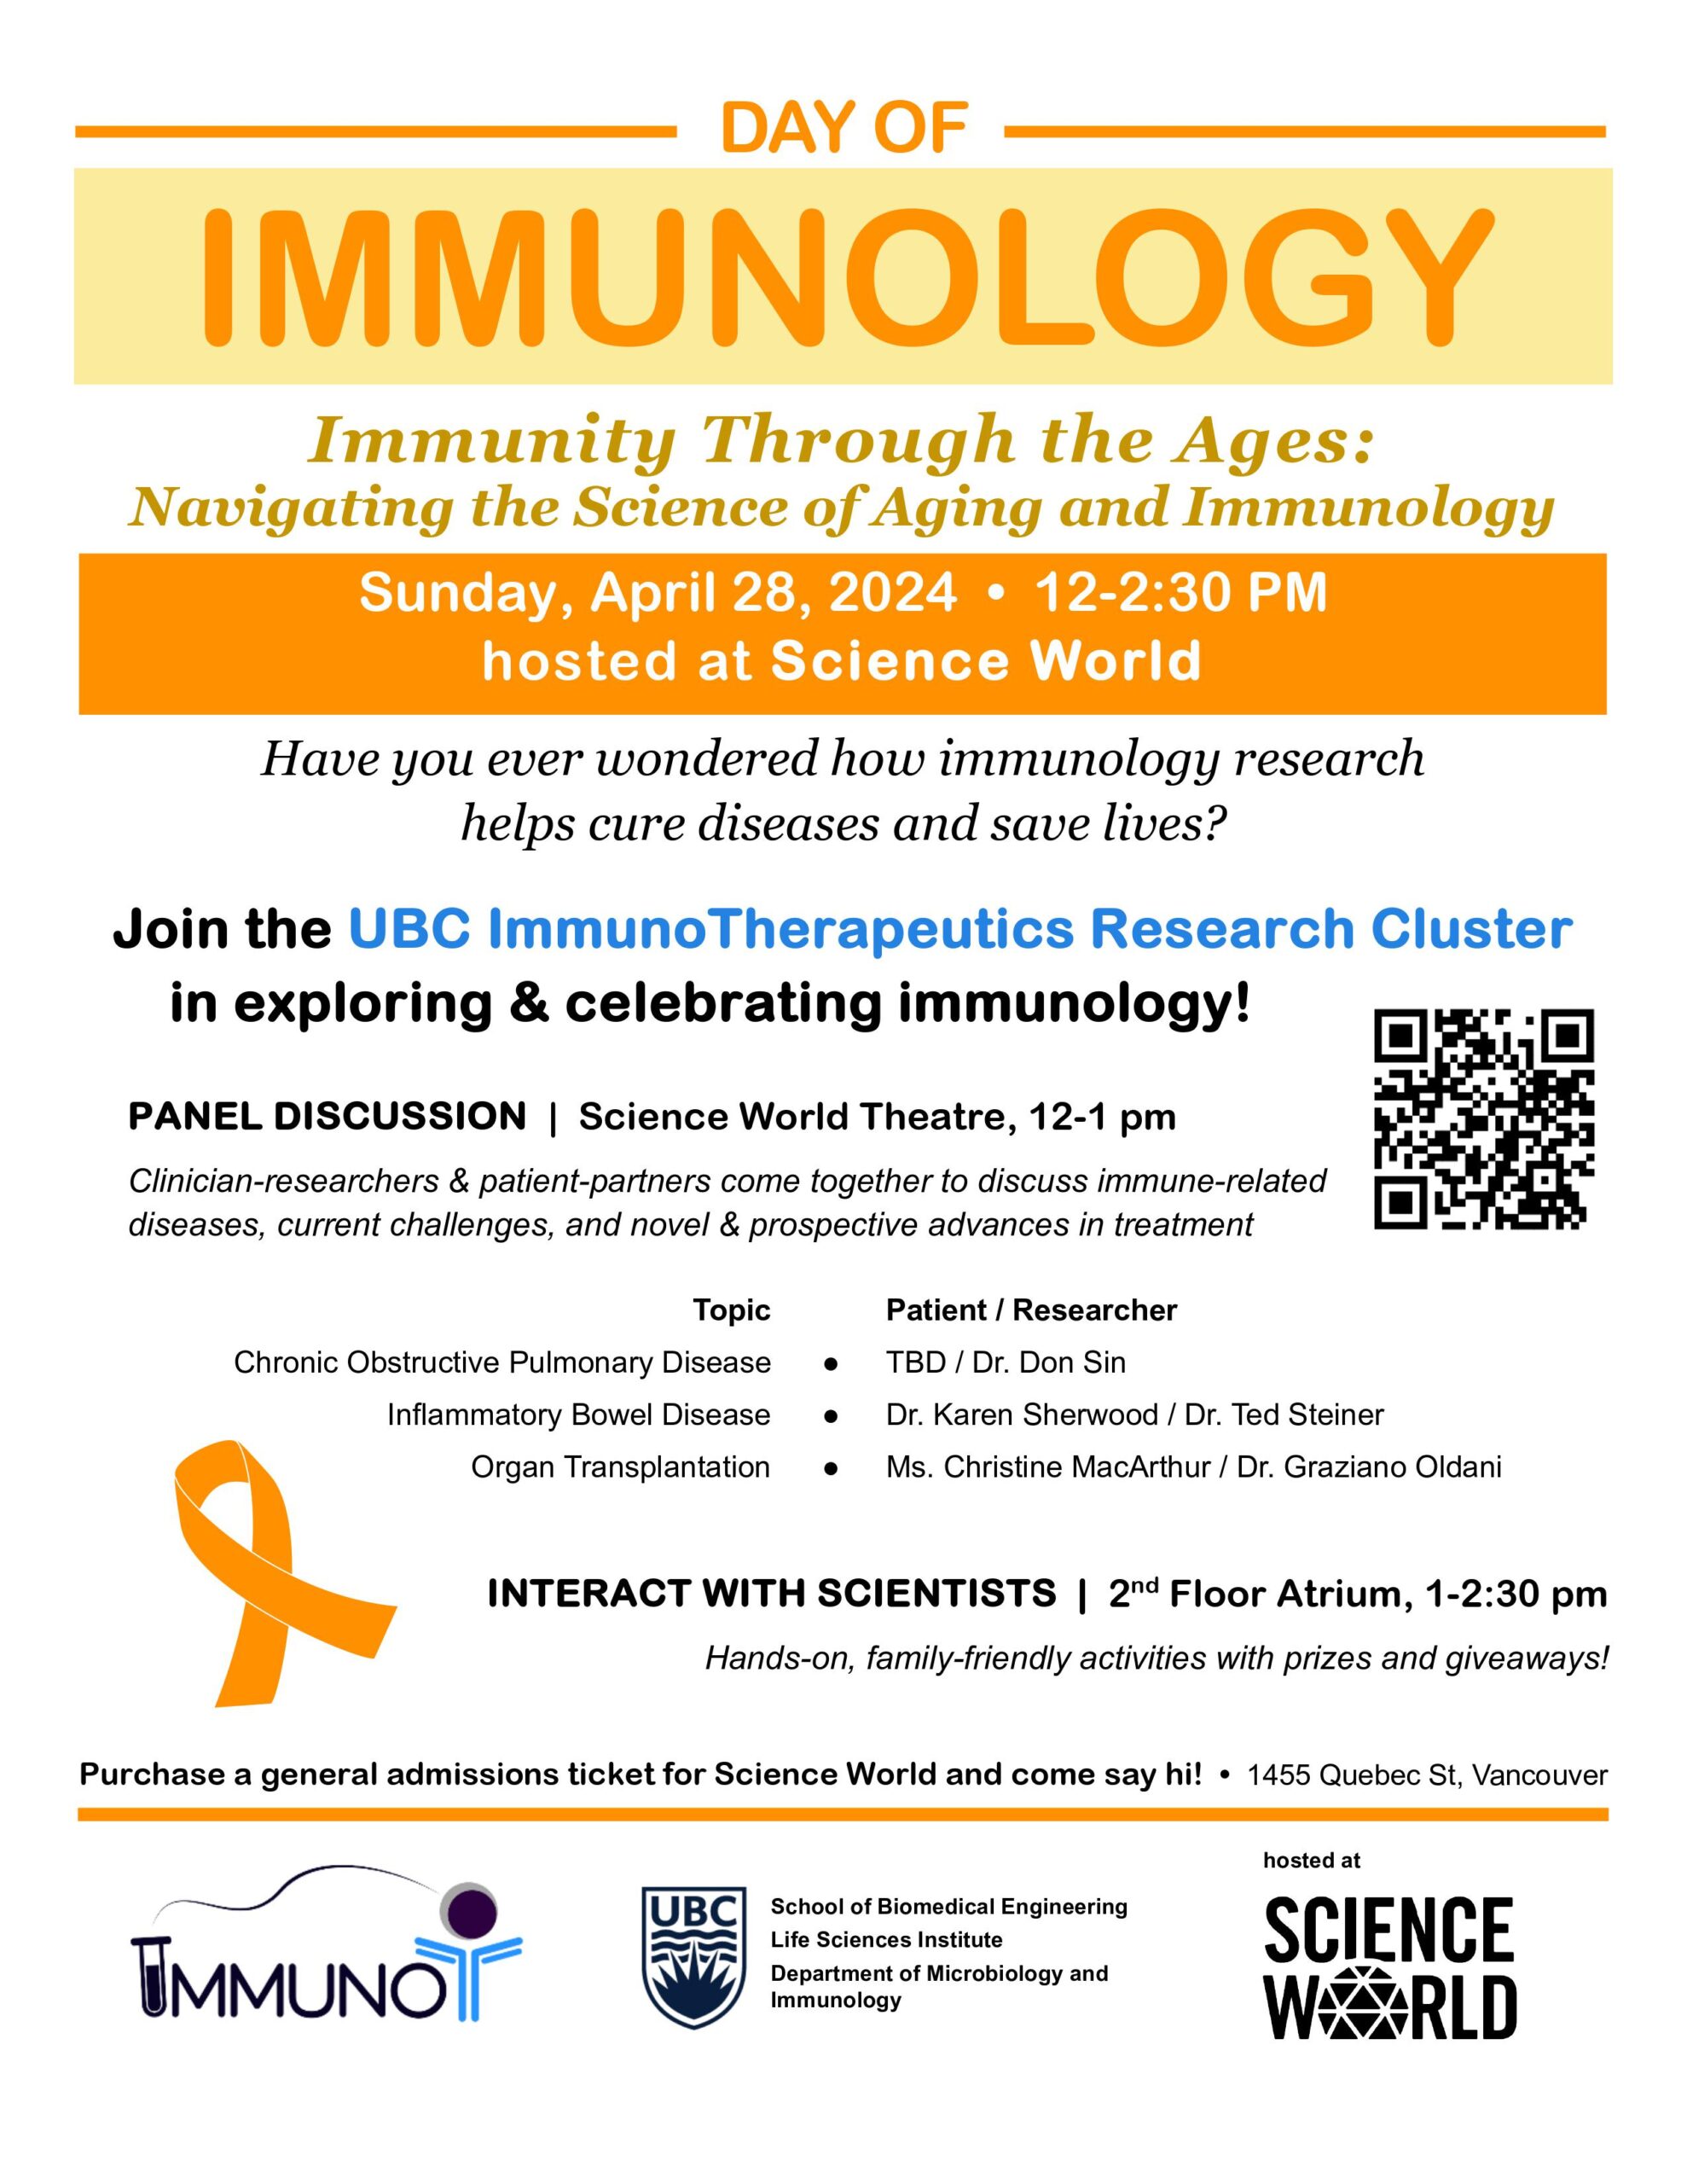 Day of Immunology Flyer. Text reads: Immunity through the ages: navigating the science of aging and immunology. Sunday April 28, 2024 from 12-2:30PM hosted at Science World. Have you ever wondered how immunology research helps curse diseases and save lives? Joint he UBC Immunotherapeutics research cluster in exploring and celebrating immunology.